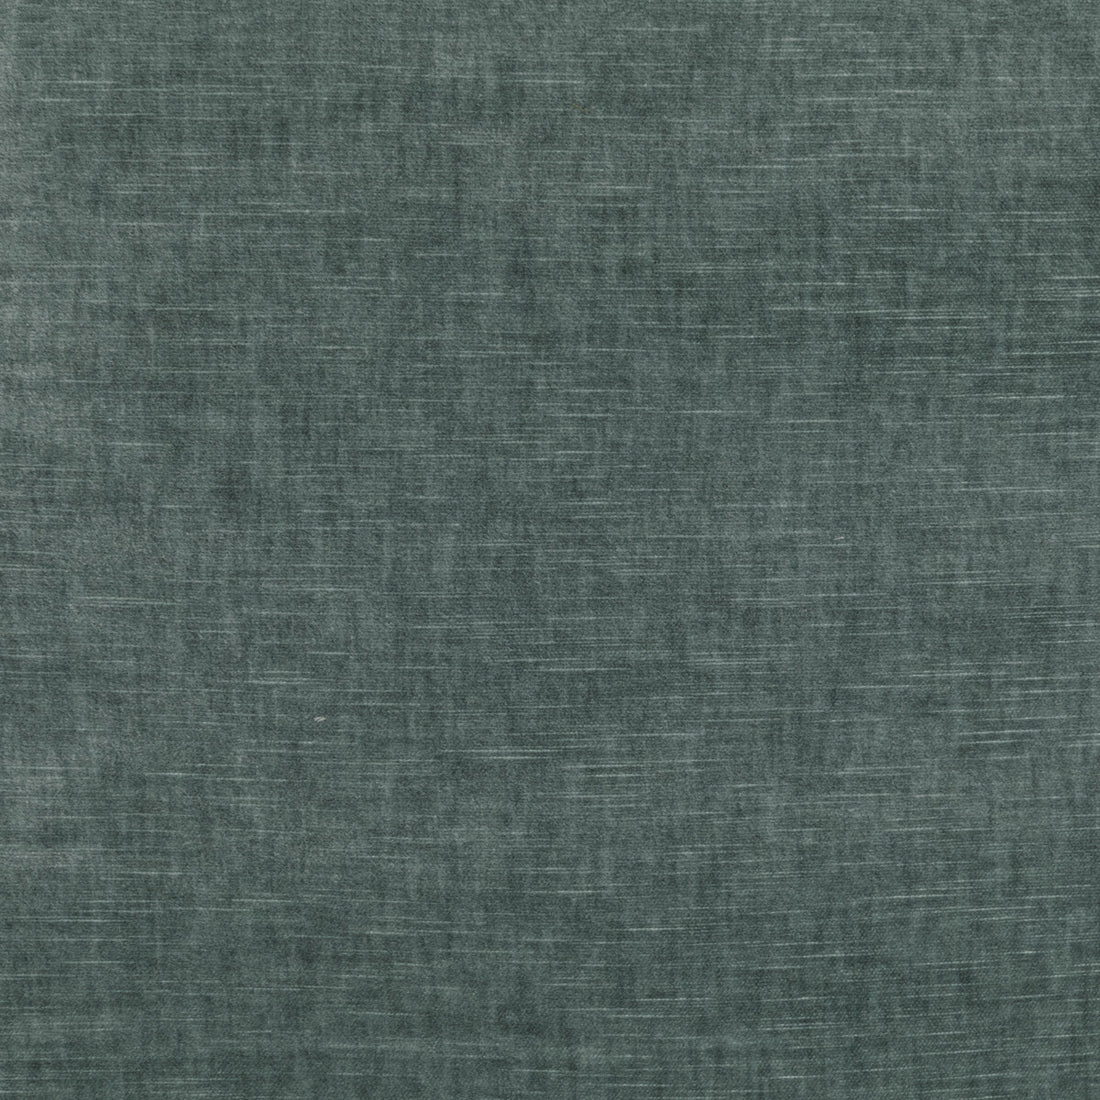 Montage fabric in glacial color - pattern GWF-3526.135.0 - by Lee Jofa Modern in the Kelly Wearstler VI collection